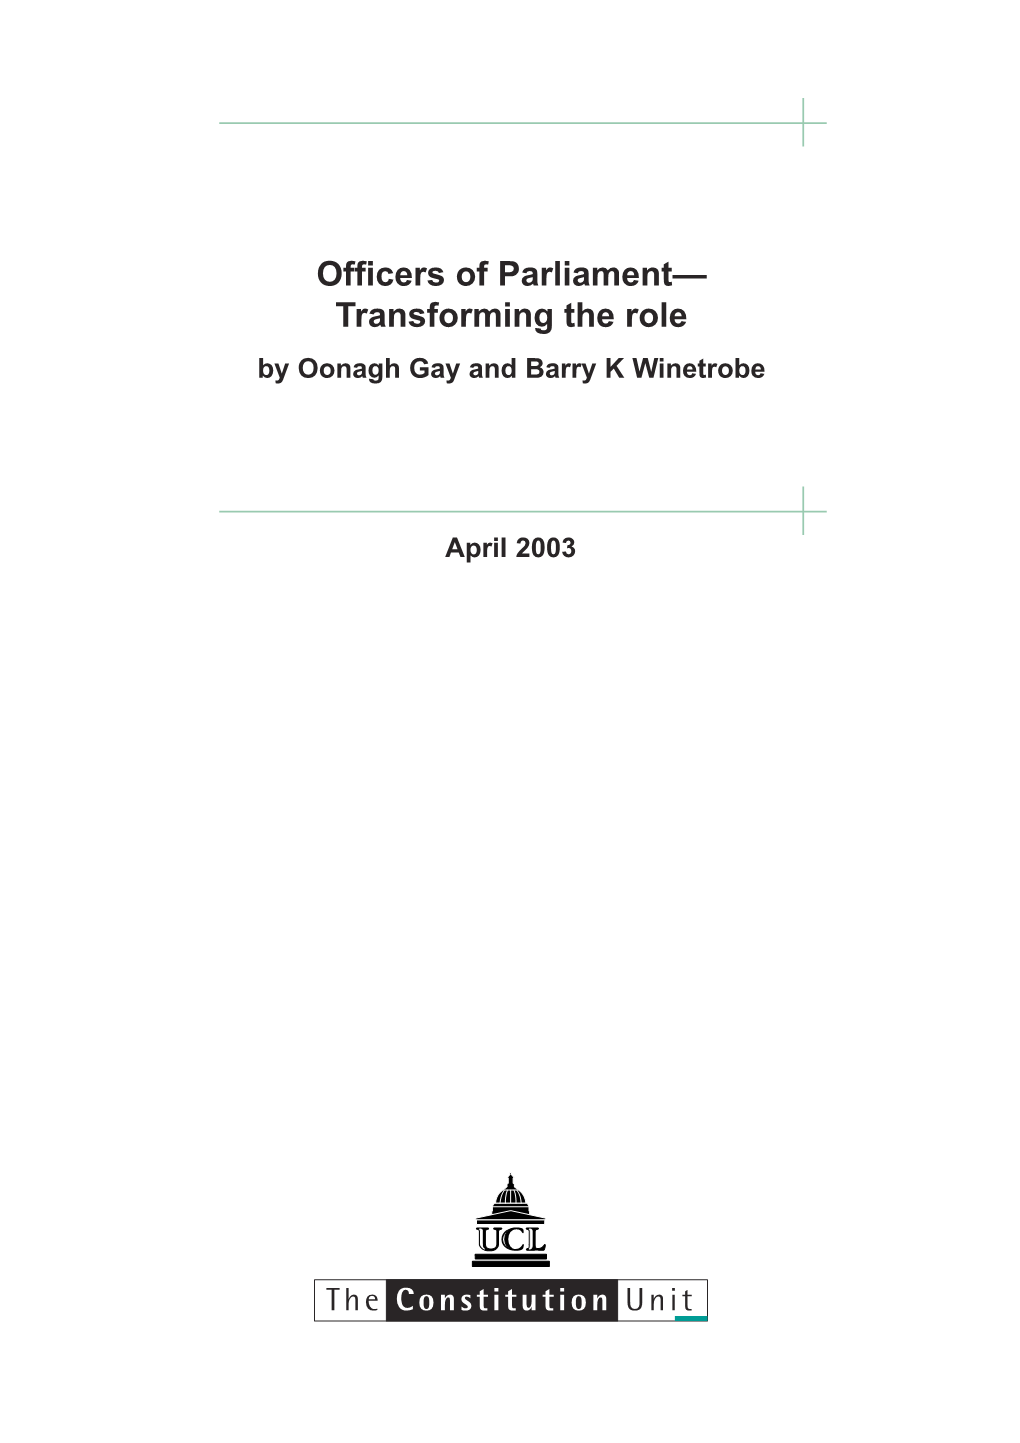 Officers of Parliament— Transforming the Role by Oonagh Gay and Barry K Winetrobe